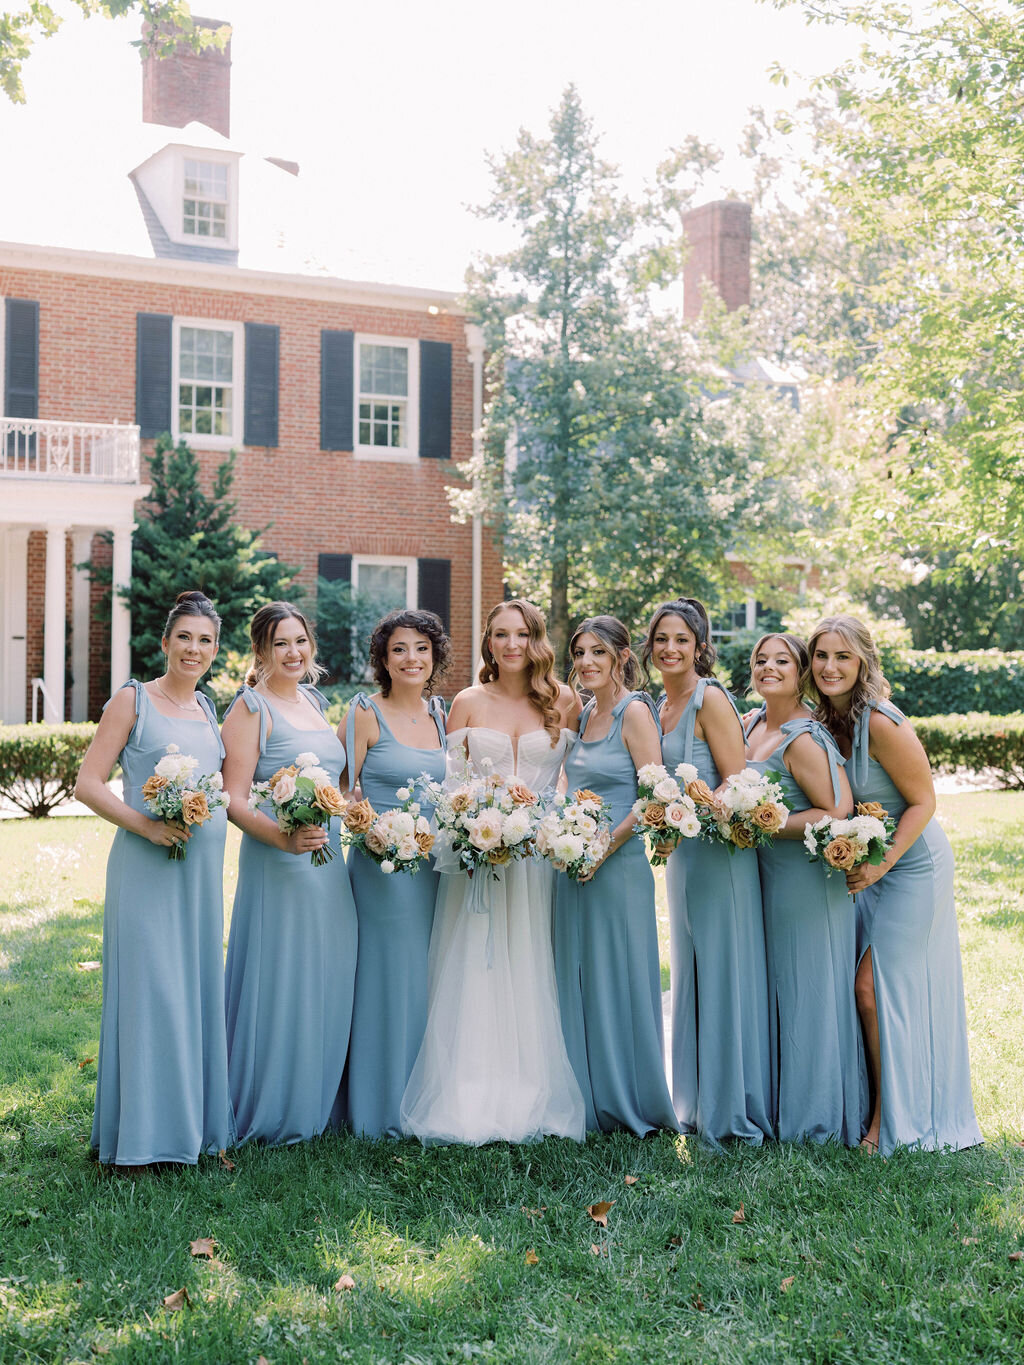 Bridal party holding bouquets in front of the Brittland Estate mansion wearing light blue silk dresses.